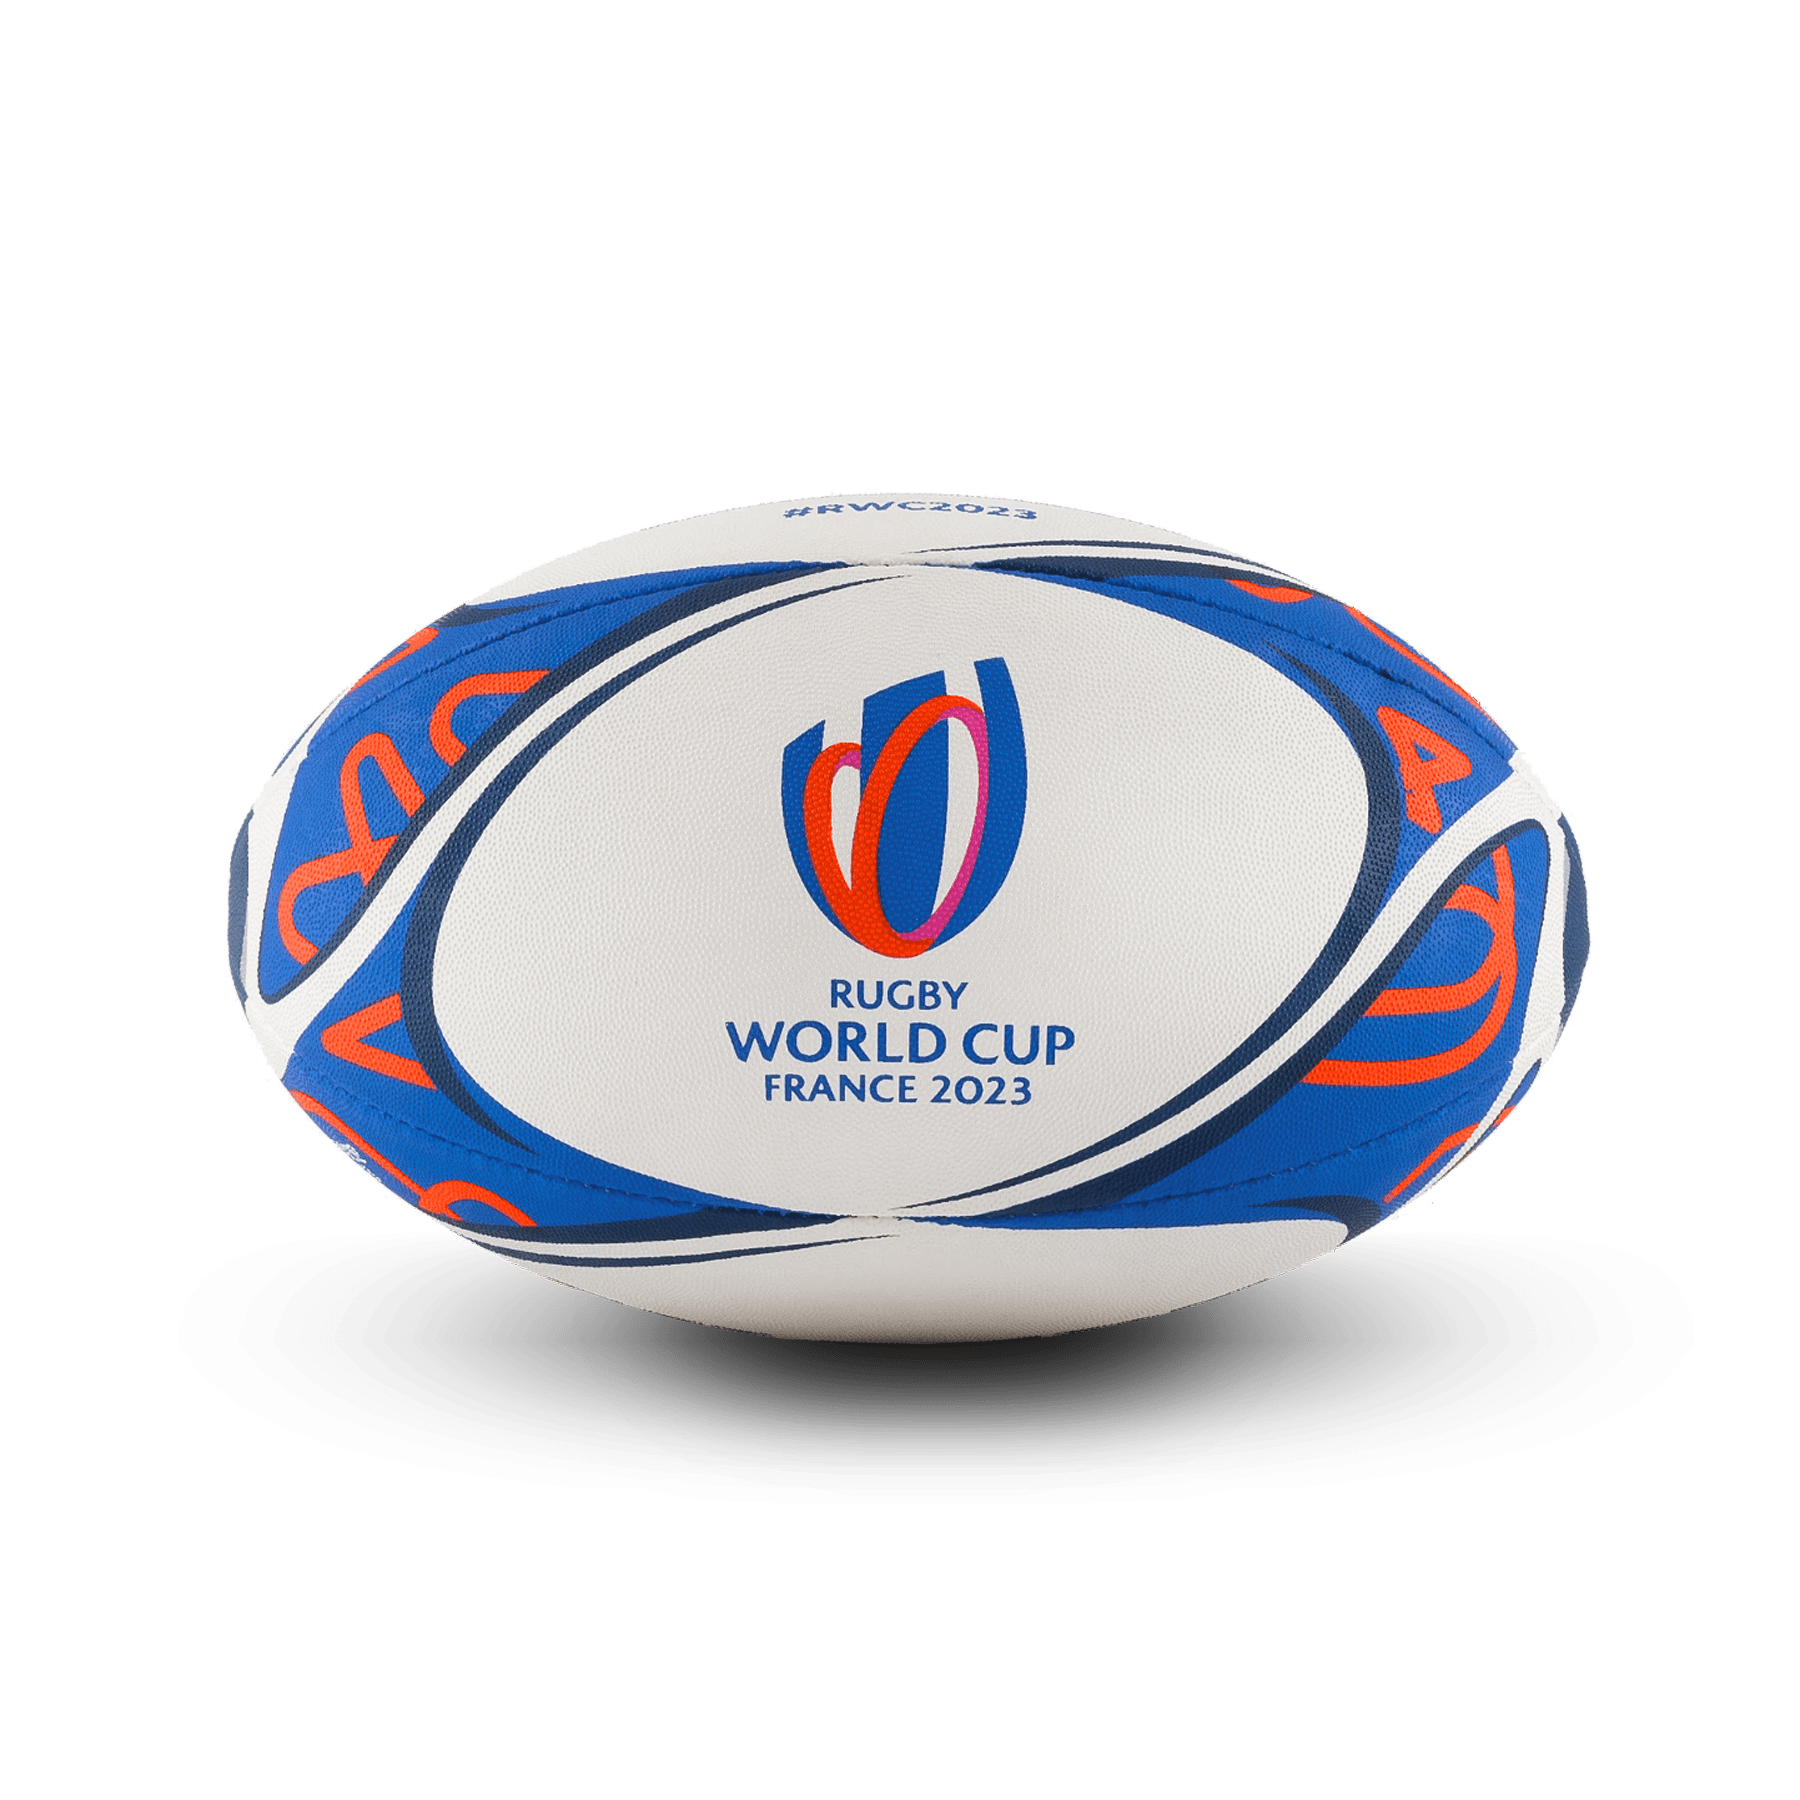 rugby-world-cup-france-2023-ball-gilbert_2000x.png